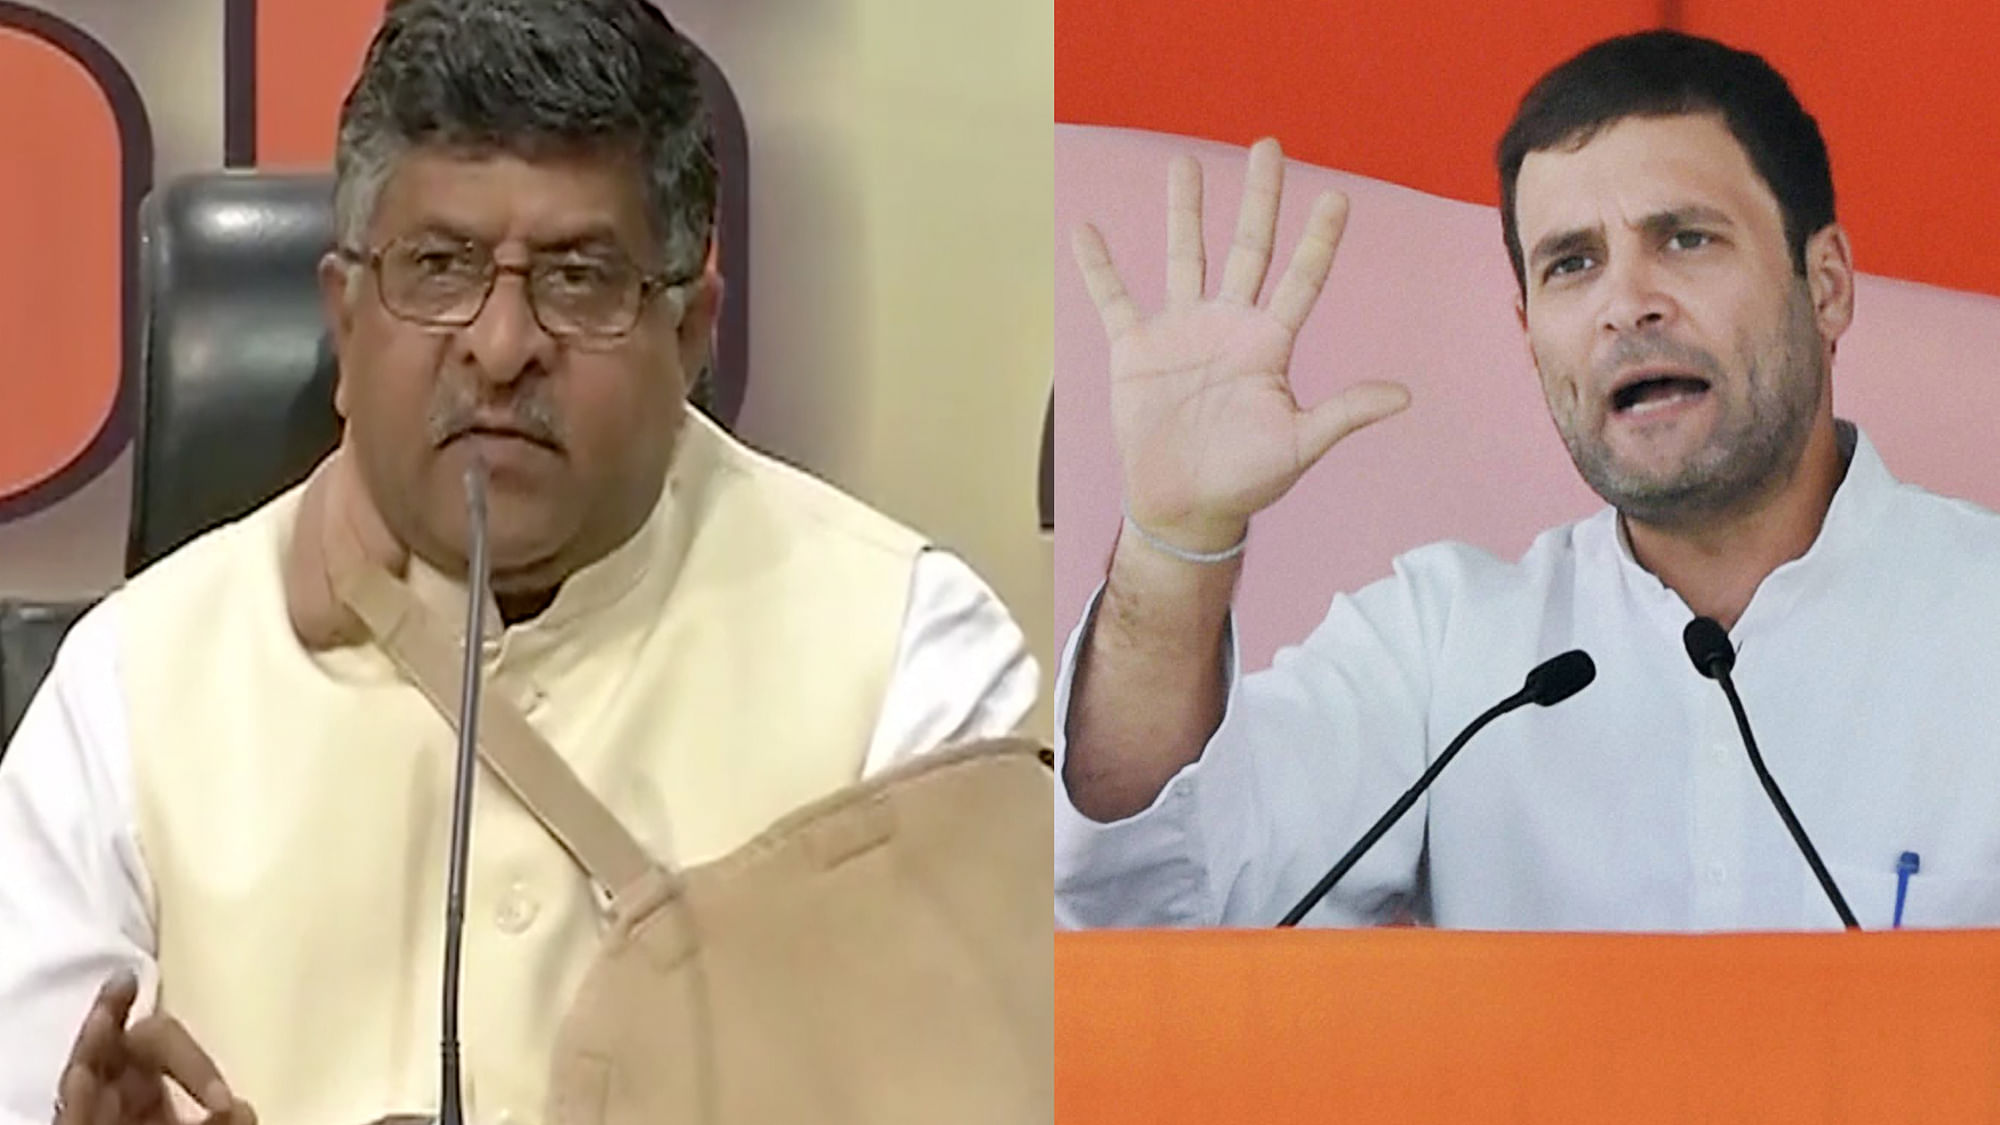 Referring to the alleged gang-rape and death of a 19-year-old Dalit woman in UP’s Hathras as “unfortunate”, Union Minister Ravi Shankar Prasad asked why Congress leaders Rahul and Priyanka Gandhi were not speaking about the alleged rape of two minors in Rajasthan’s Baran.